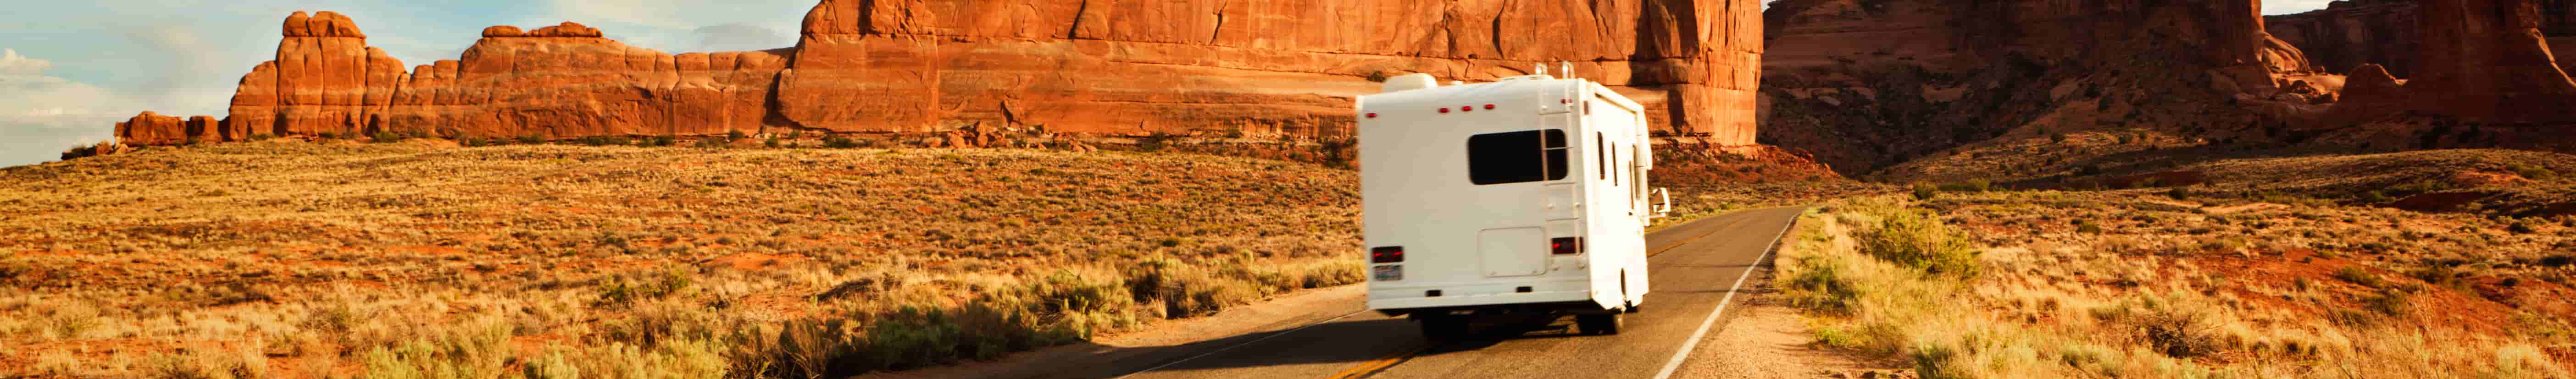 RVing Trends's profile banner